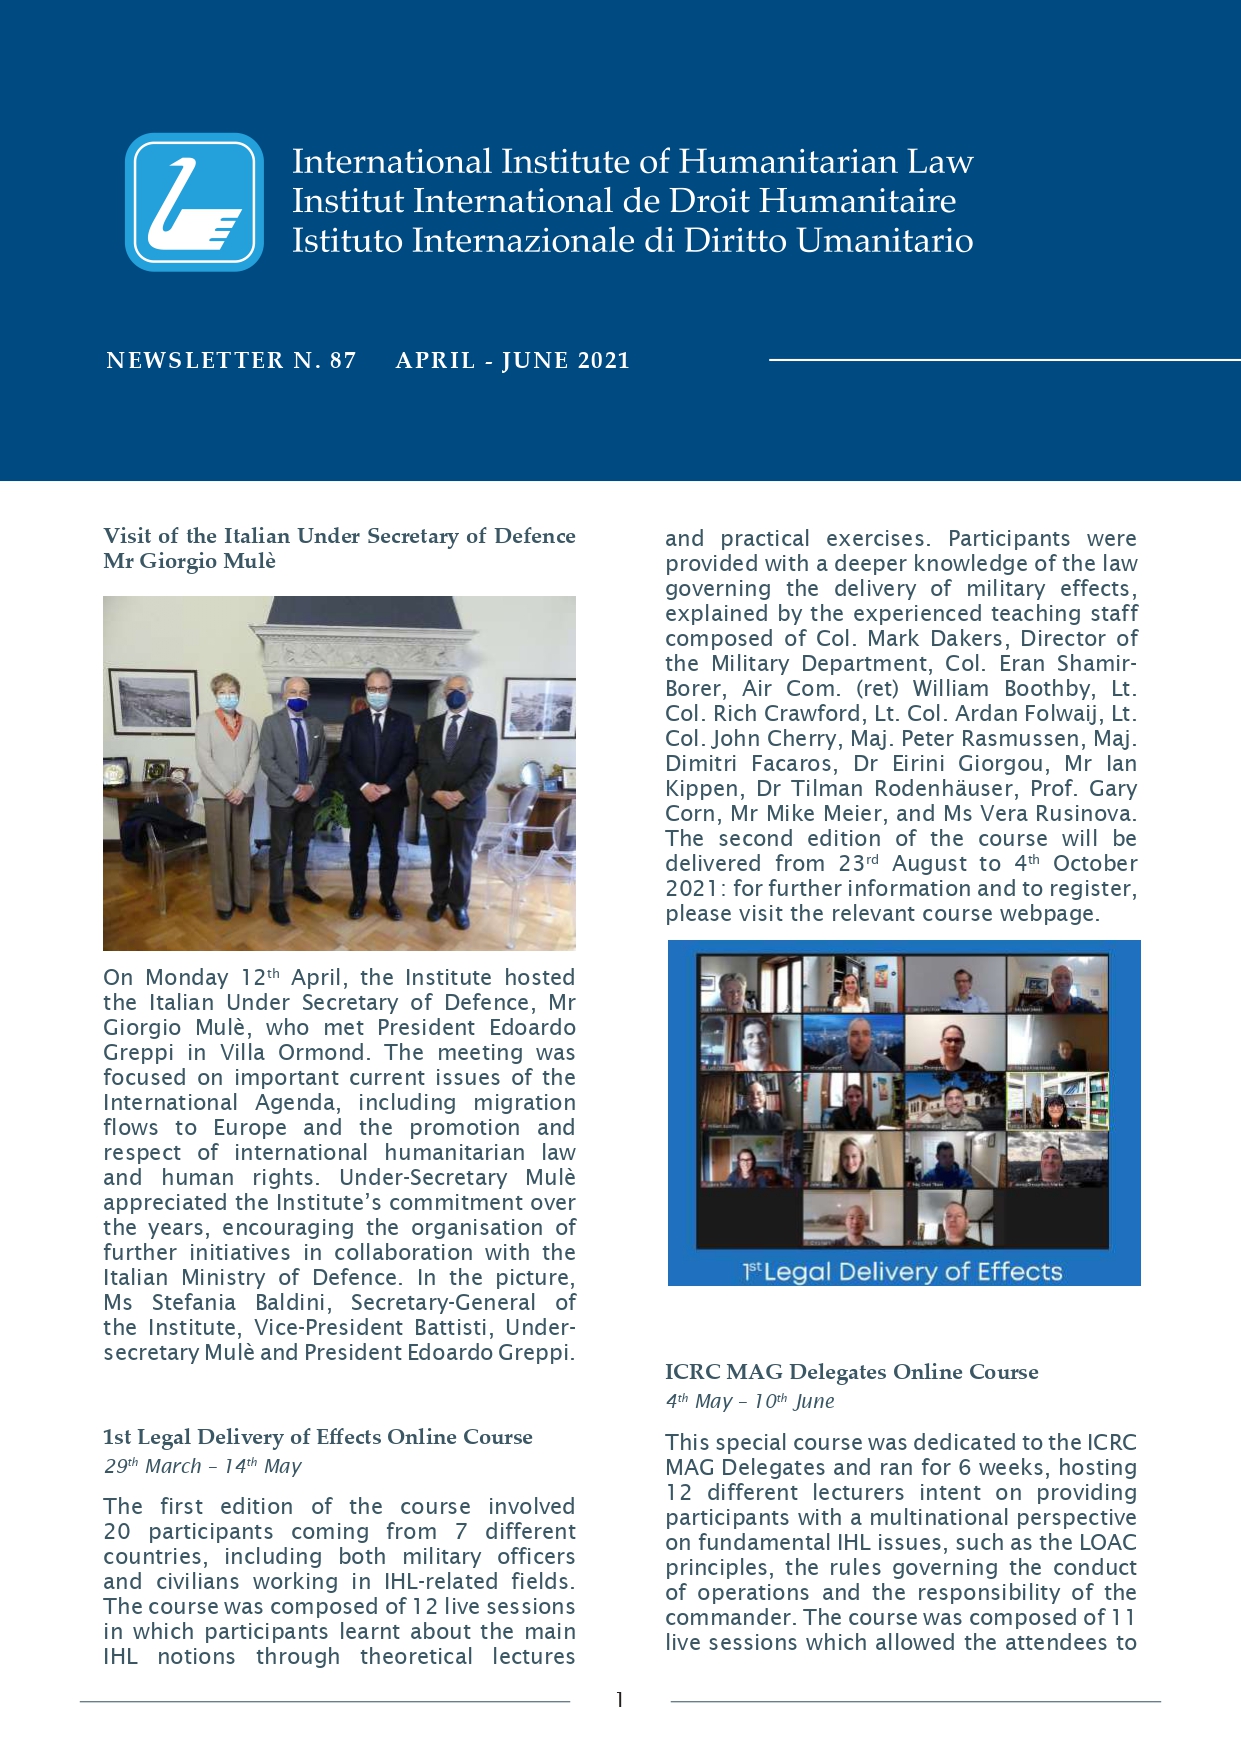 Download the last newsletter of the Institute (April – June 2021)!